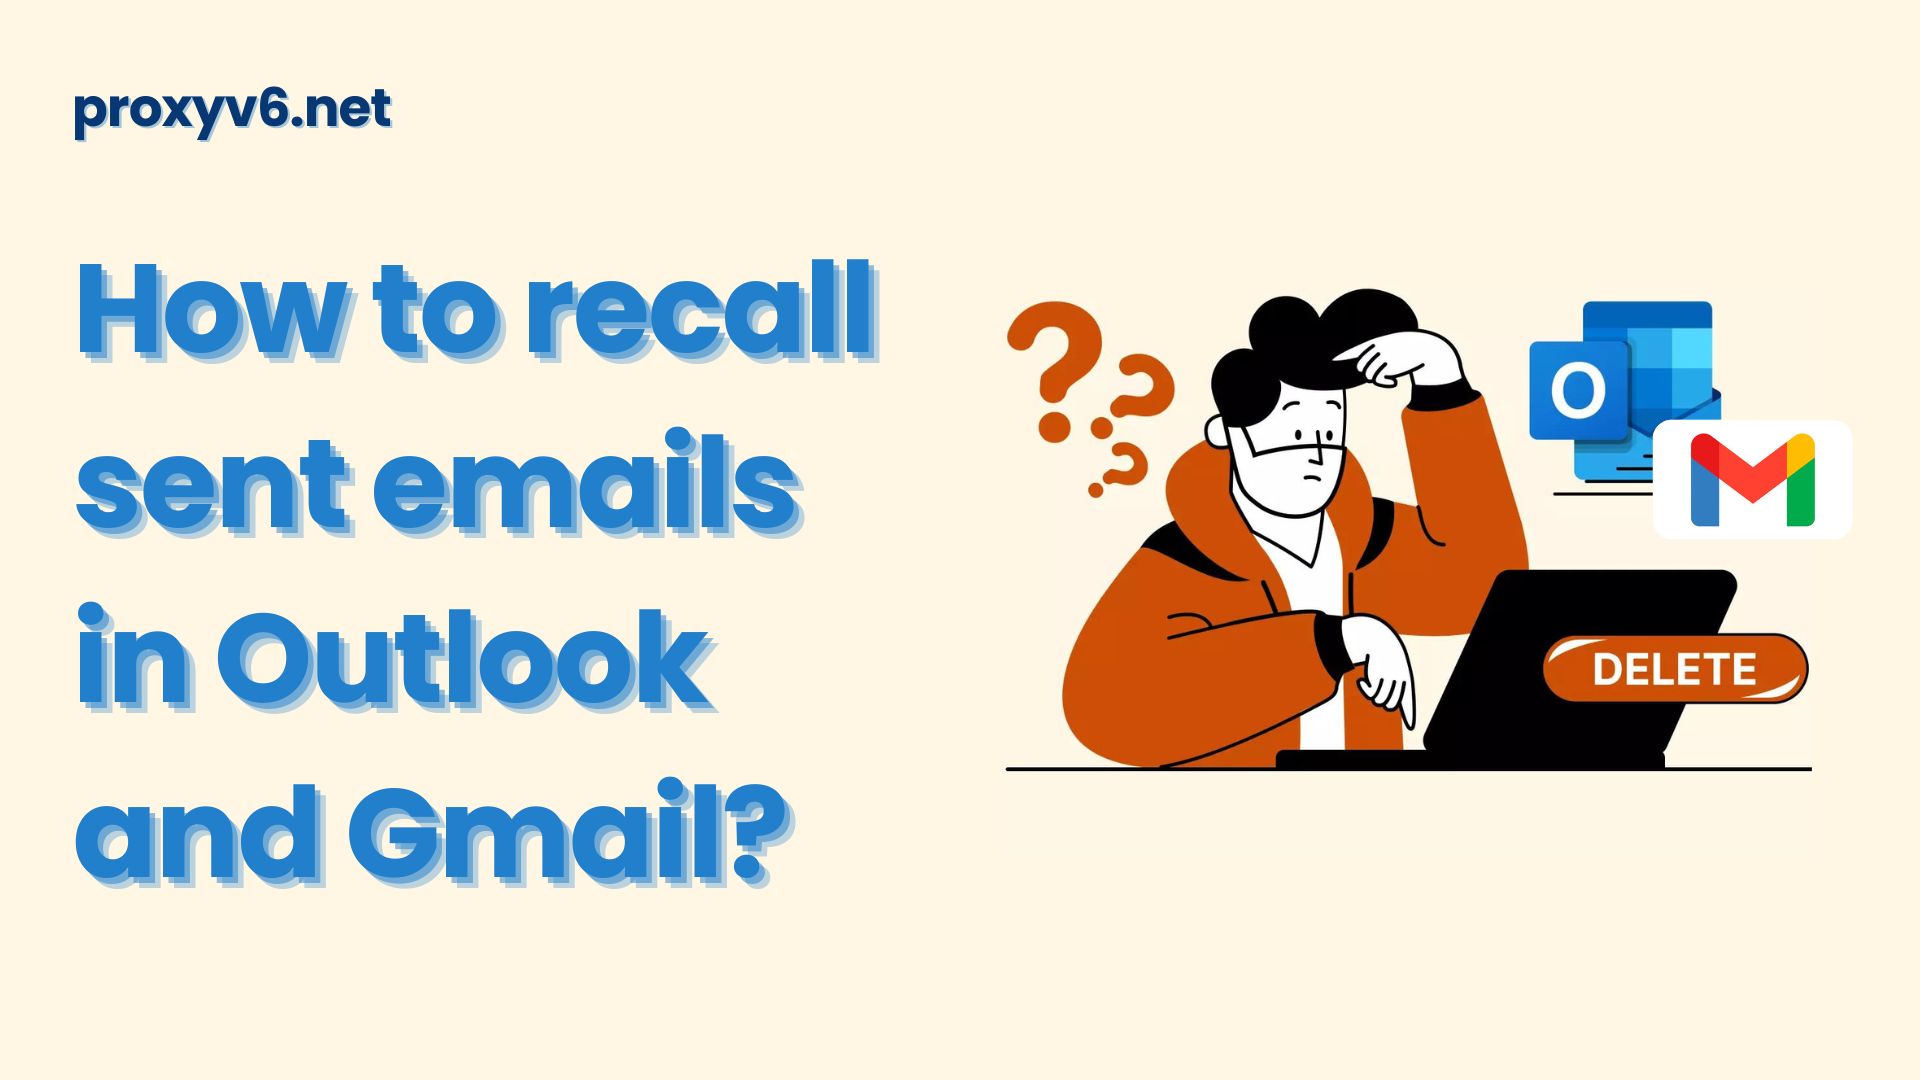 How to recall sent emails in Outlook and Gmail?